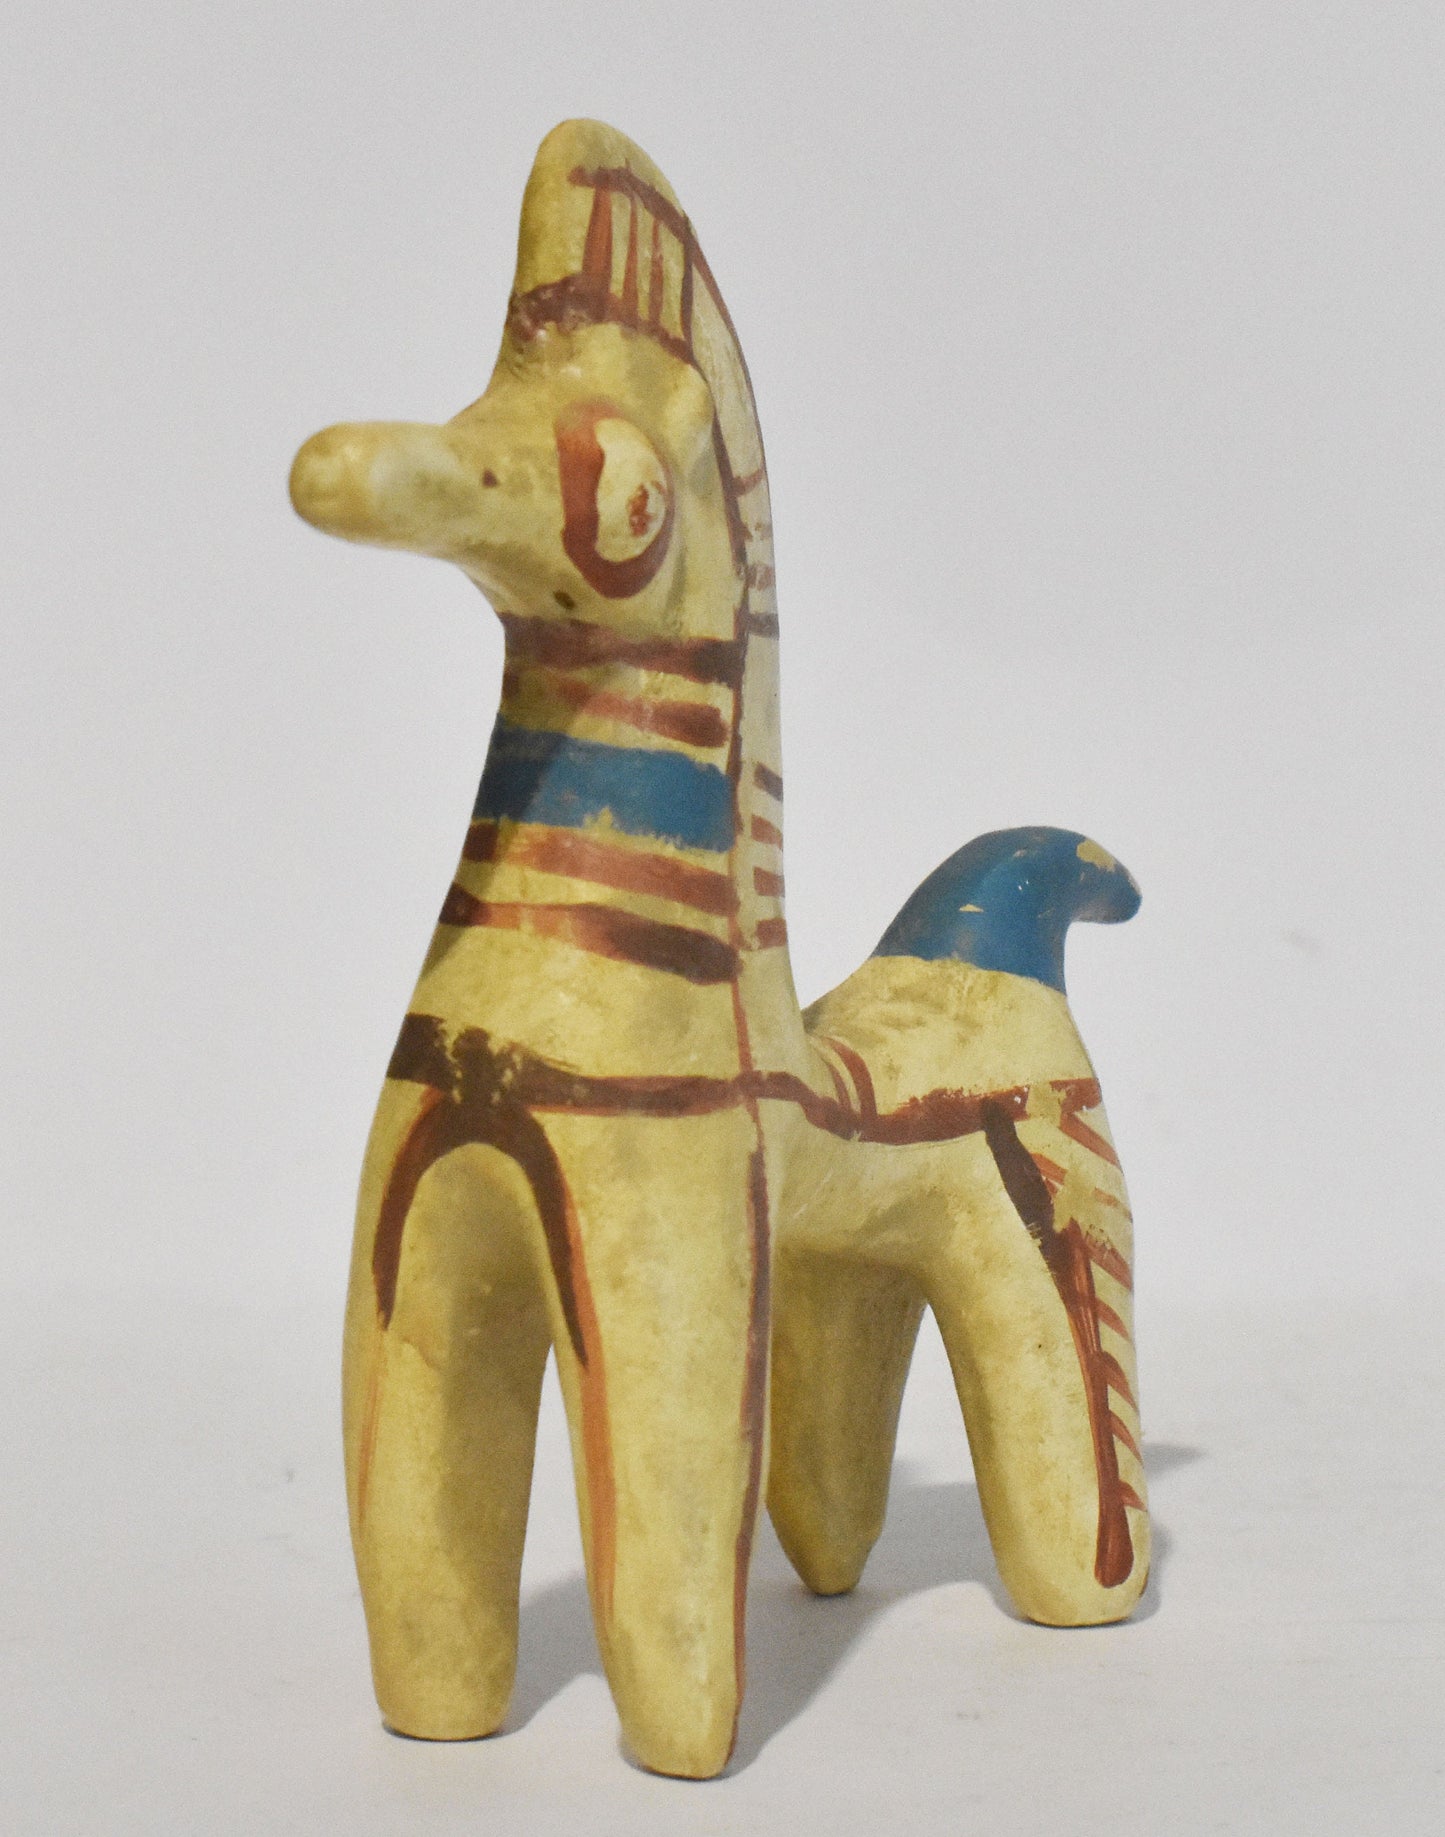 Idol of a Horse - Cyprus - 1100 BC - Symbol of Courage and Integrity- Miniature - Museum Reproduction - Ceramic Artifact